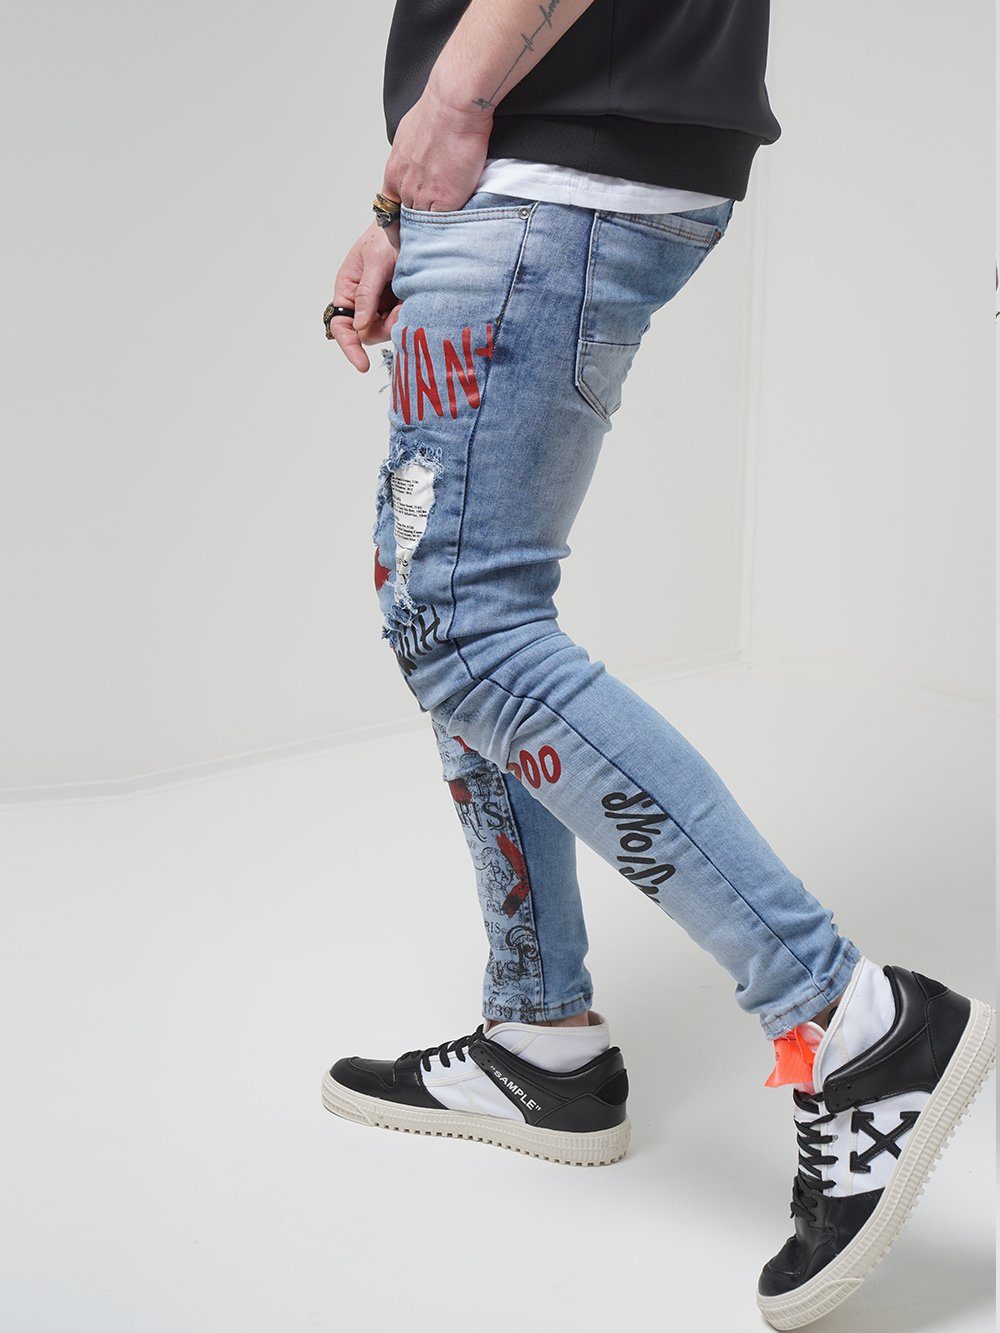 A man wearing BANKSY ripped jeans and sneakers.